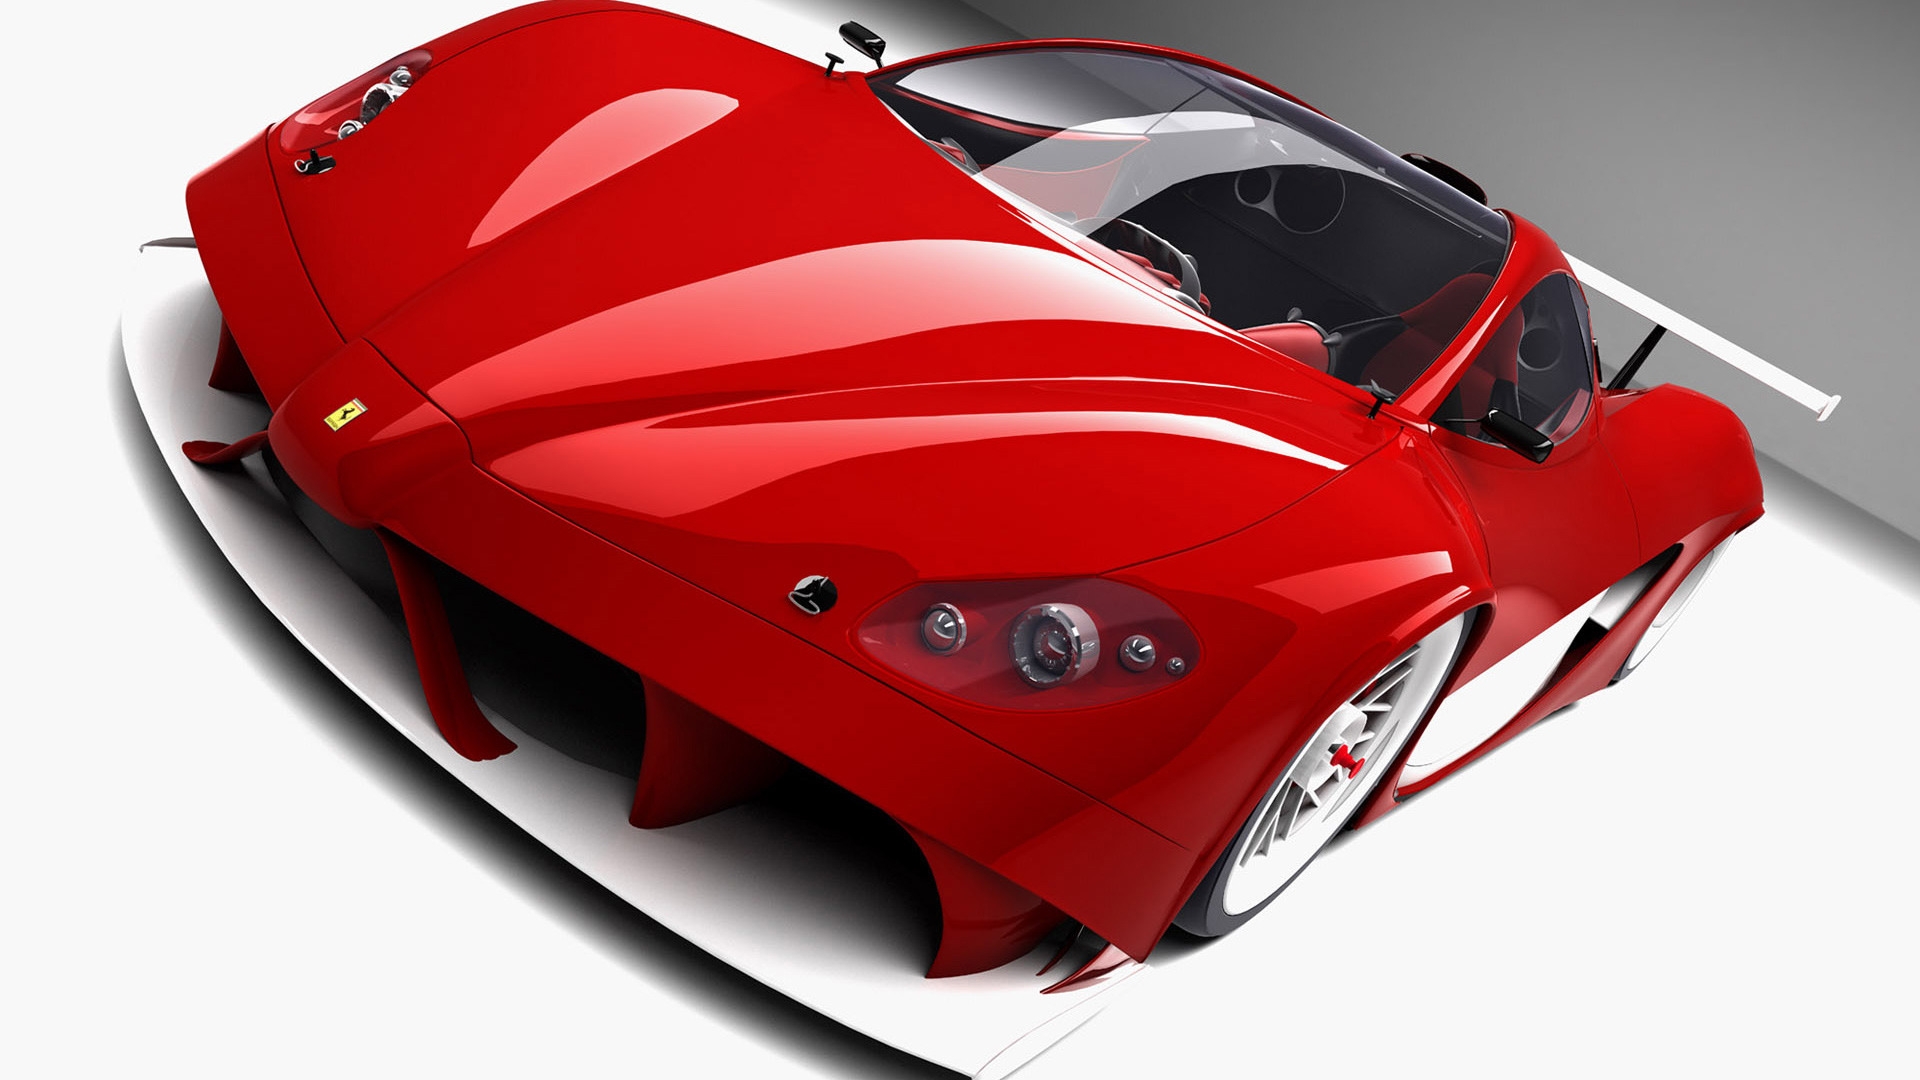 Red Ferrari Front Angle for 1920 x 1080 HDTV 1080p resolution